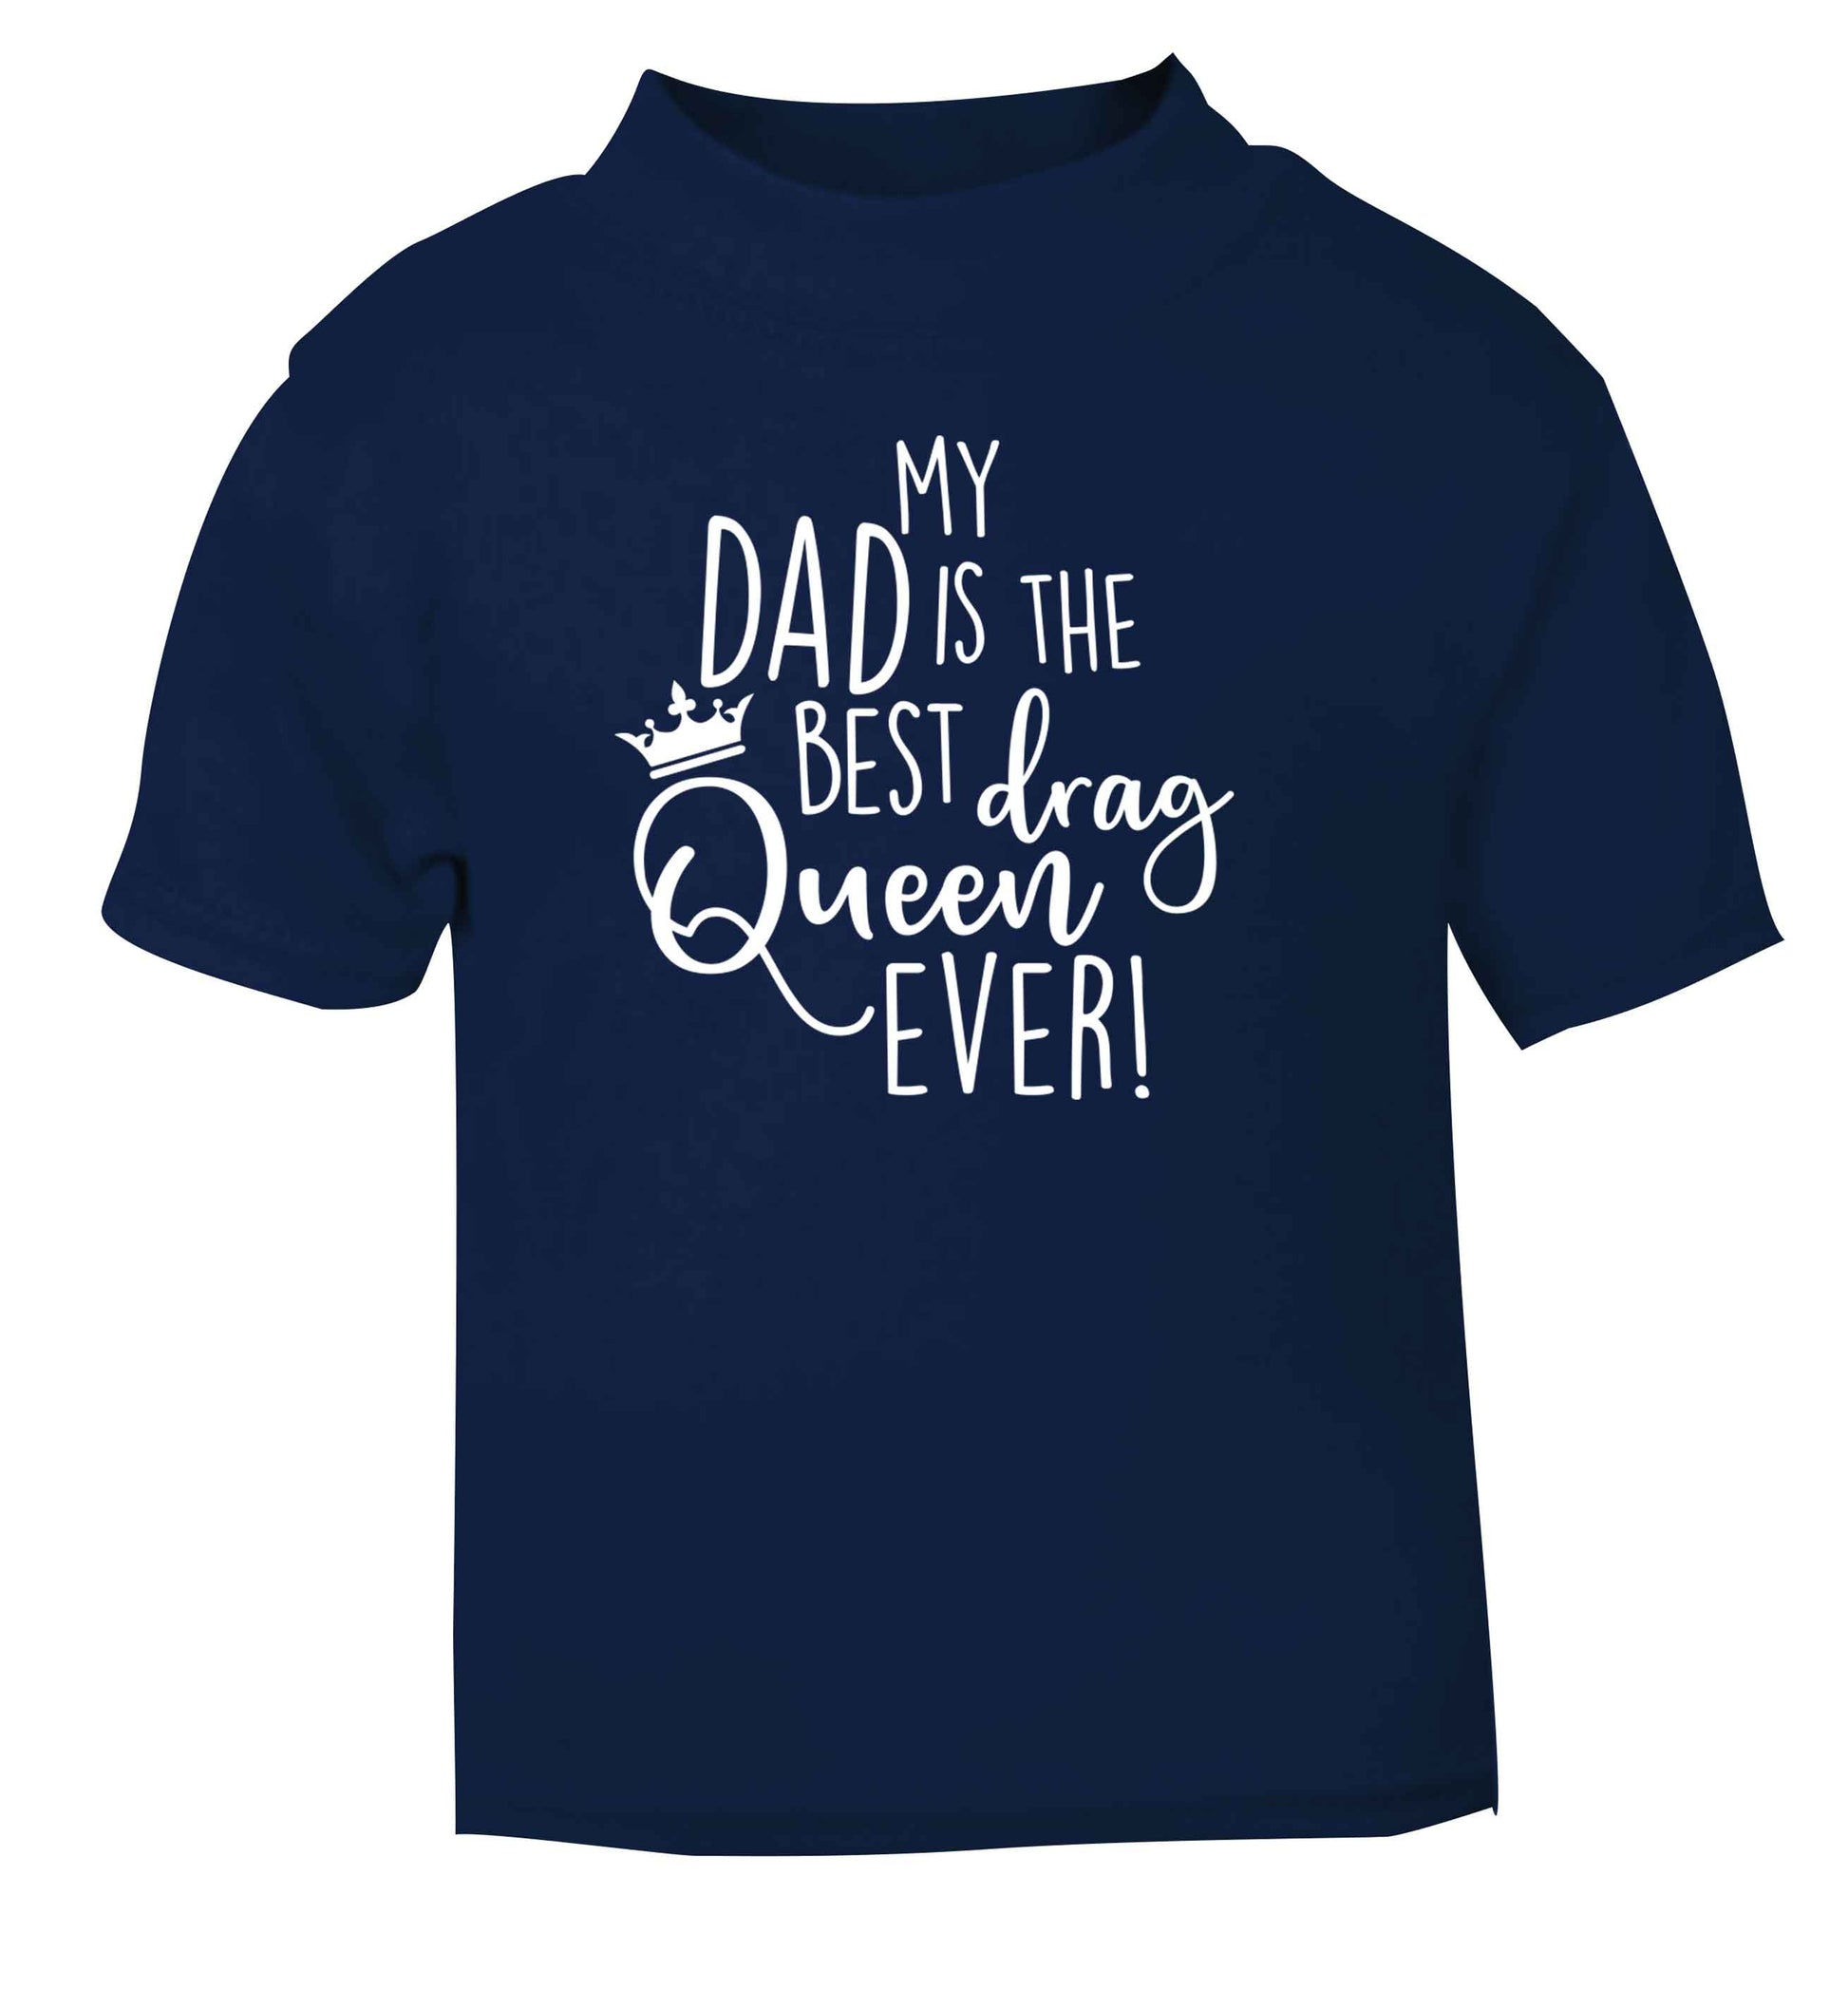 My dad is the best drag Queen ever navy Baby Toddler Tshirt 2 Years